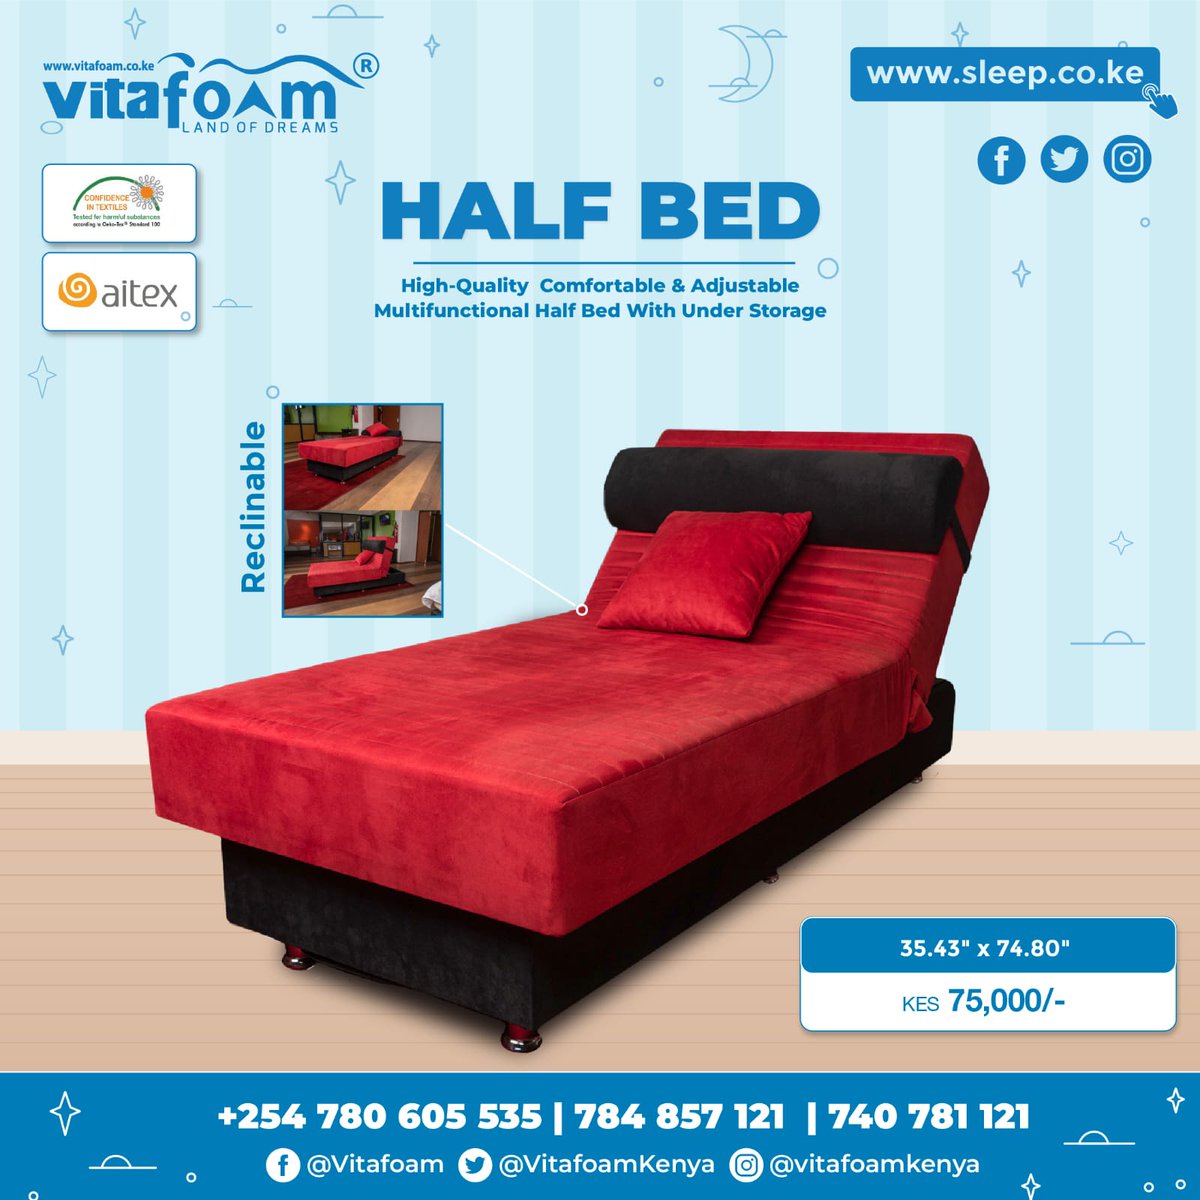 🌟⬅️⬆️☁️🛏️ Amazing Space-Saving Multifunction Adjustable Beds Available Only At #VitaFoamKenya® ! 🛏️☁️⬆️➡️🌟 ☎ For All Sleep Product *Enquiries, *Orders & *Deliveries: 0780 605 535 | 784 857 121 | 740 781 121 📍Our Locations>bit.ly/30VqOrf 🛍️ Sleep.co.ke